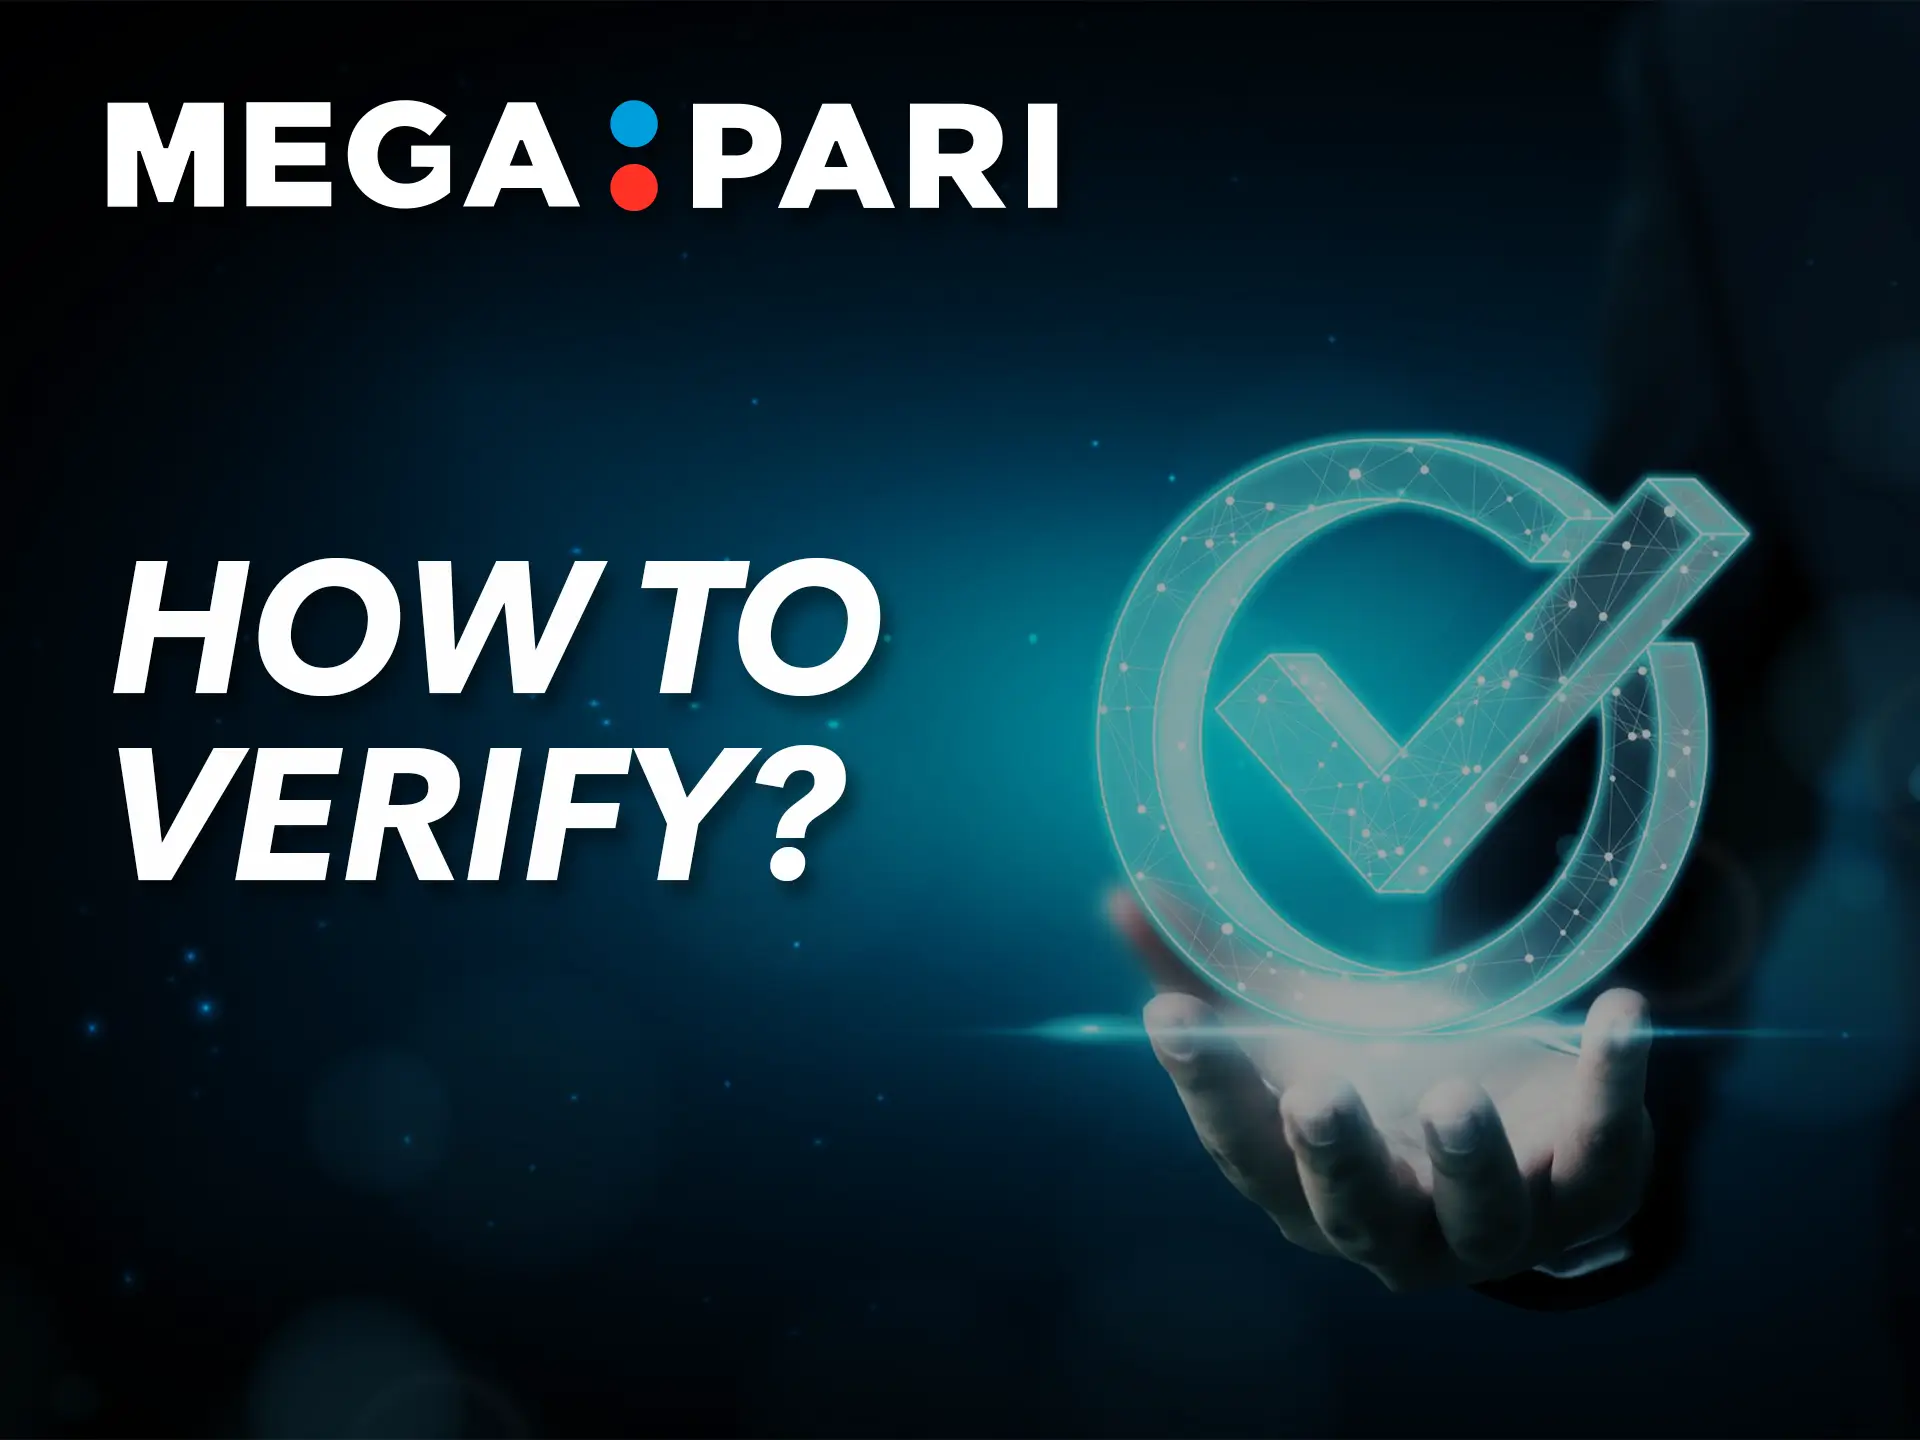 Confirm your details to get full access to all Megapari casino features.